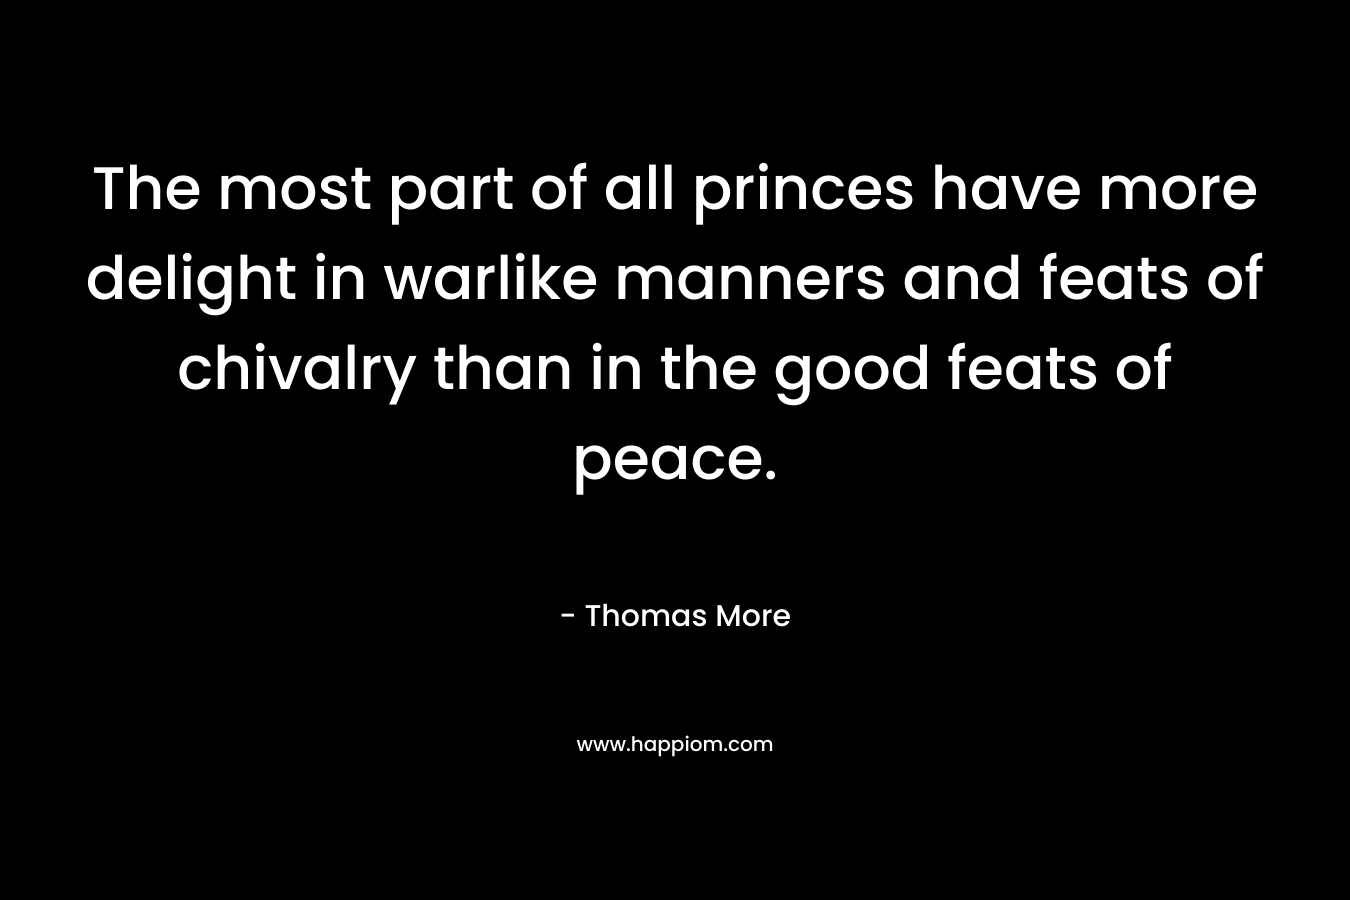 The most part of all princes have more delight in warlike manners and feats of chivalry than in the good feats of peace. – Thomas More